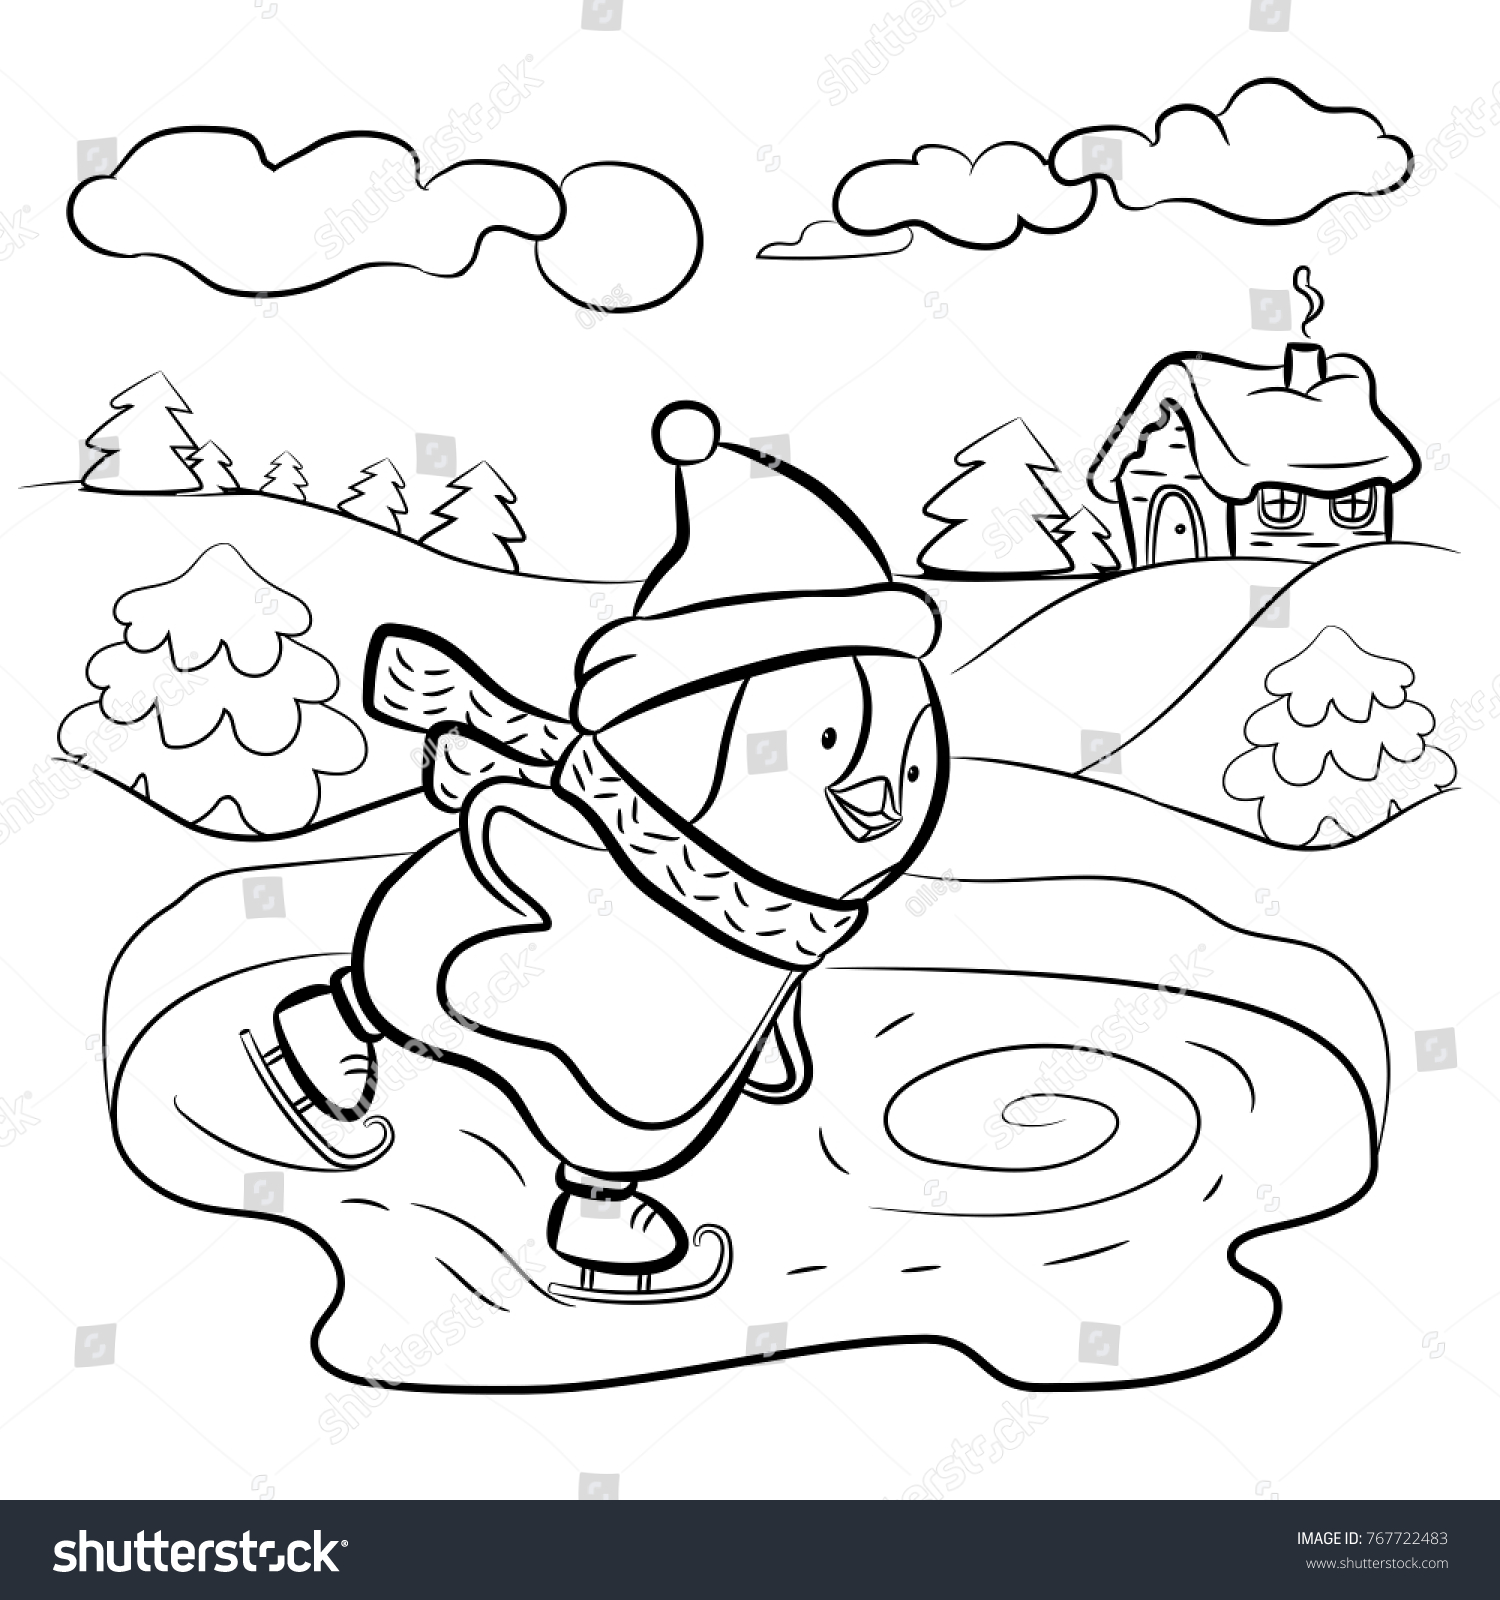 Kids coloring page penguin ice skater stock vector royalty free